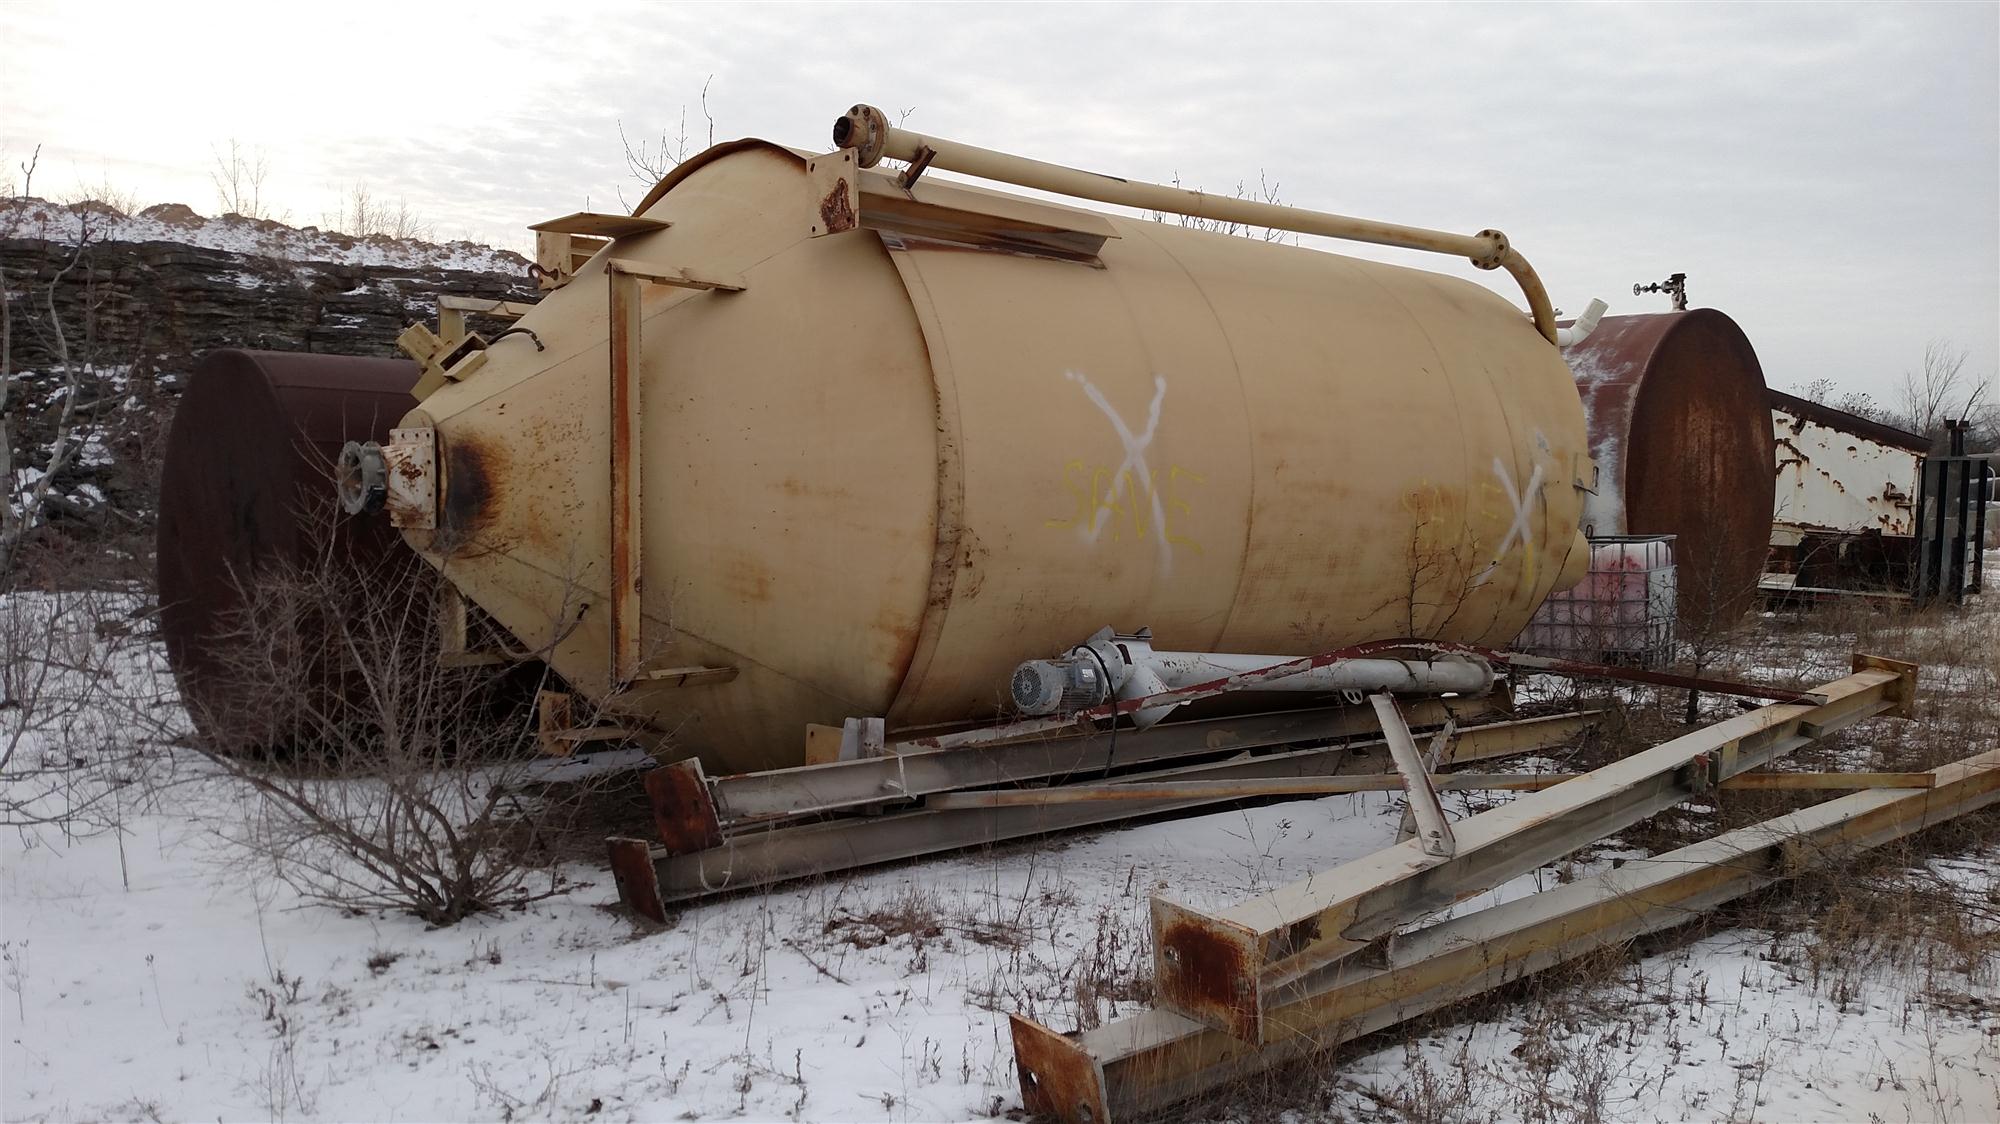 Used 300-350 bbl Silo with lower structure and 8" auger for sale